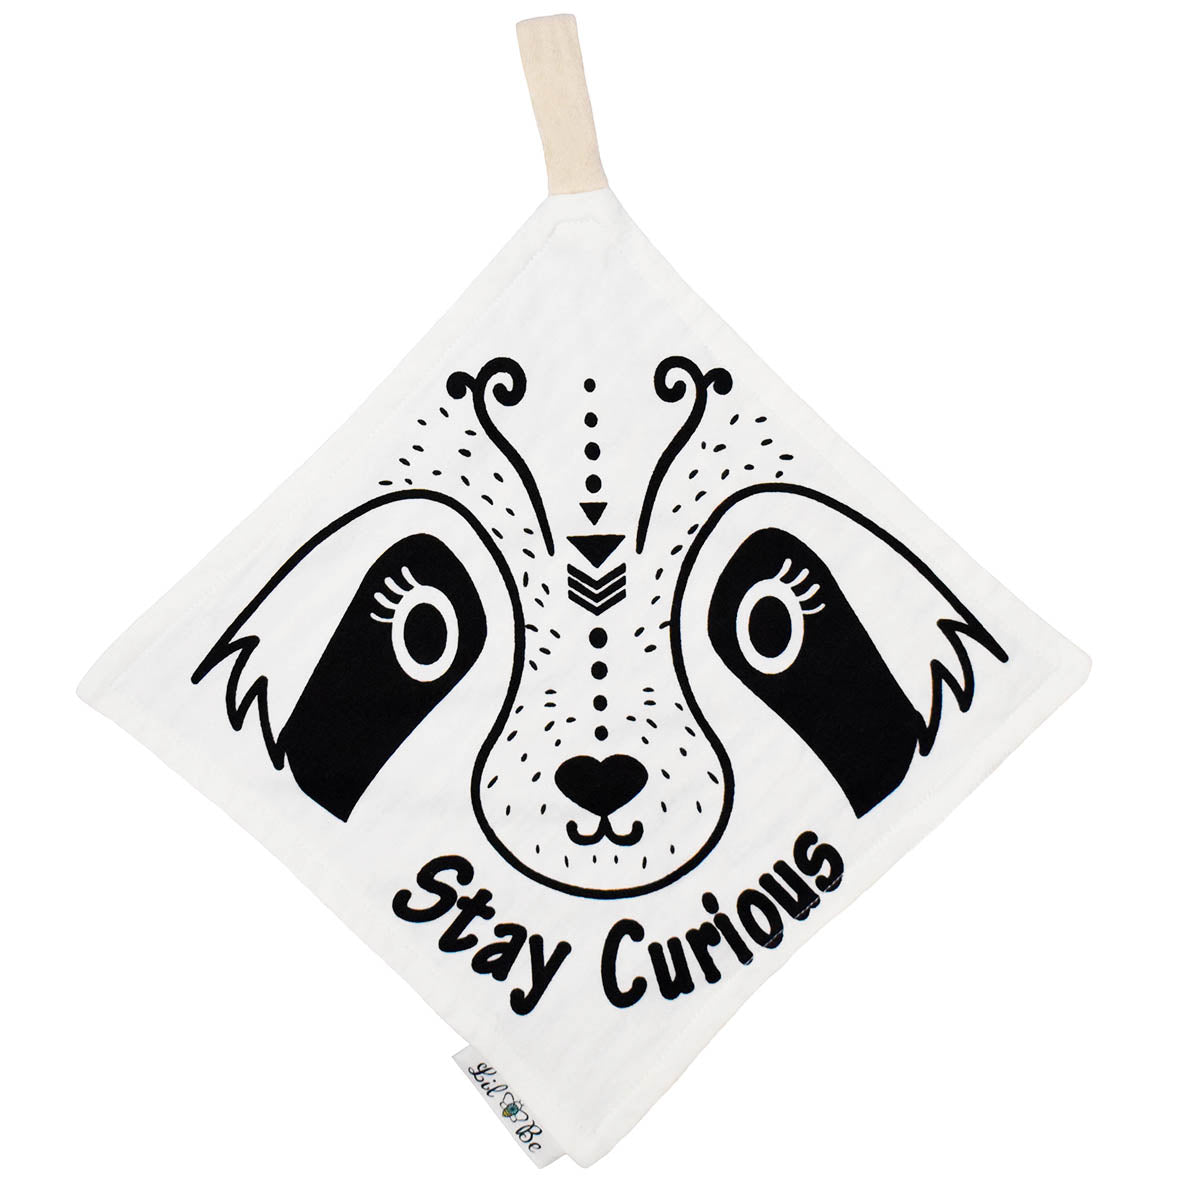 Raccoon Stay Curious Graphic on Mini Blanket with Tag to attached to Rattle